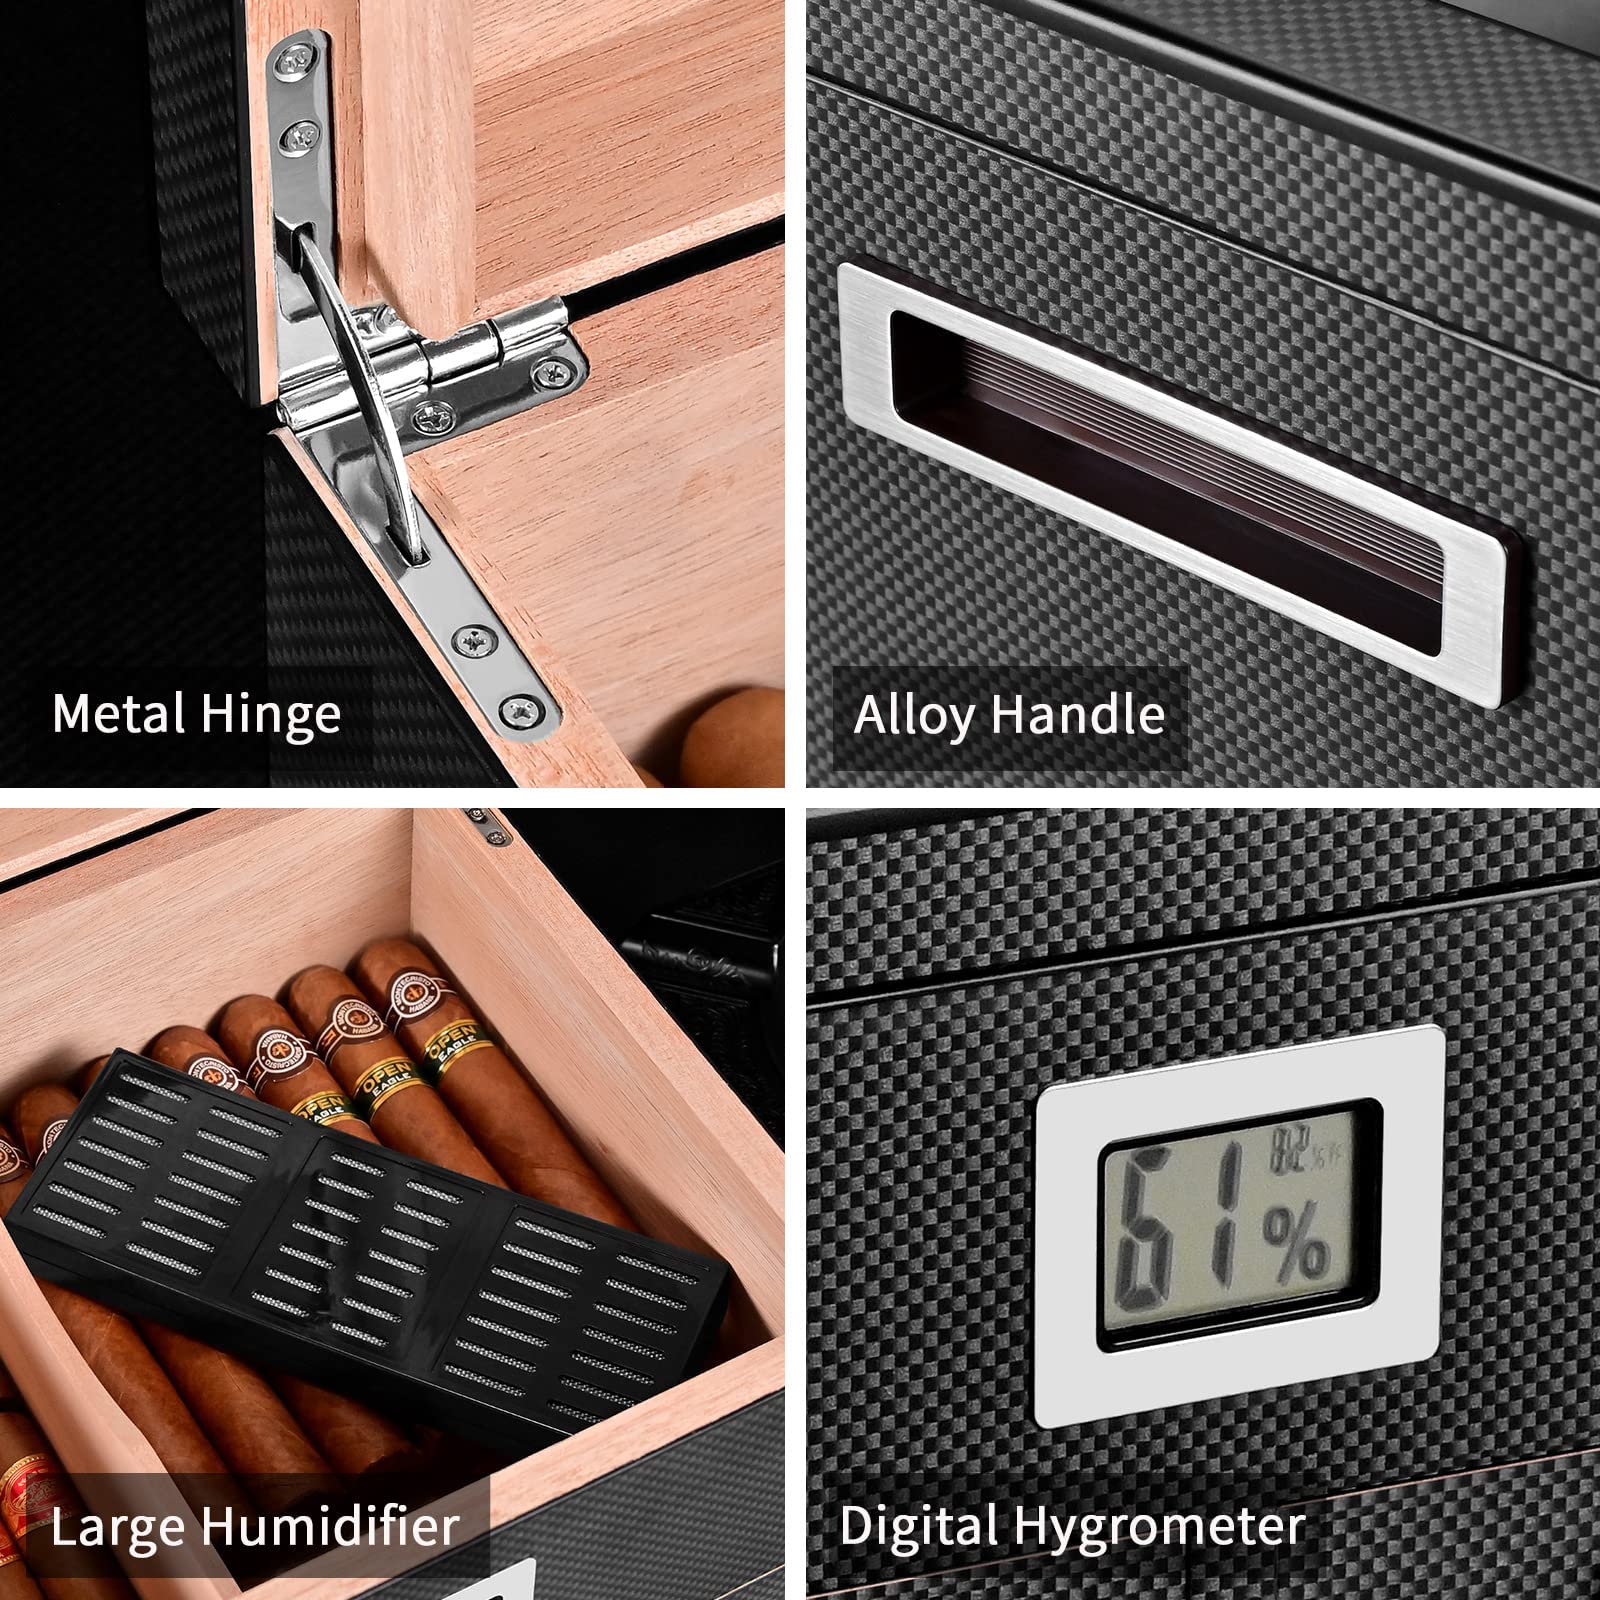 Fullrich Factory Wholesale Customize OEM/ODM Cigar Humidor with Front Digital Hygrometer and Humidifier, Spanish Cedar Tray Cigar Storage Box, Hold up to 35-50 Cigars, Gift for Men(Carbon Fiber)